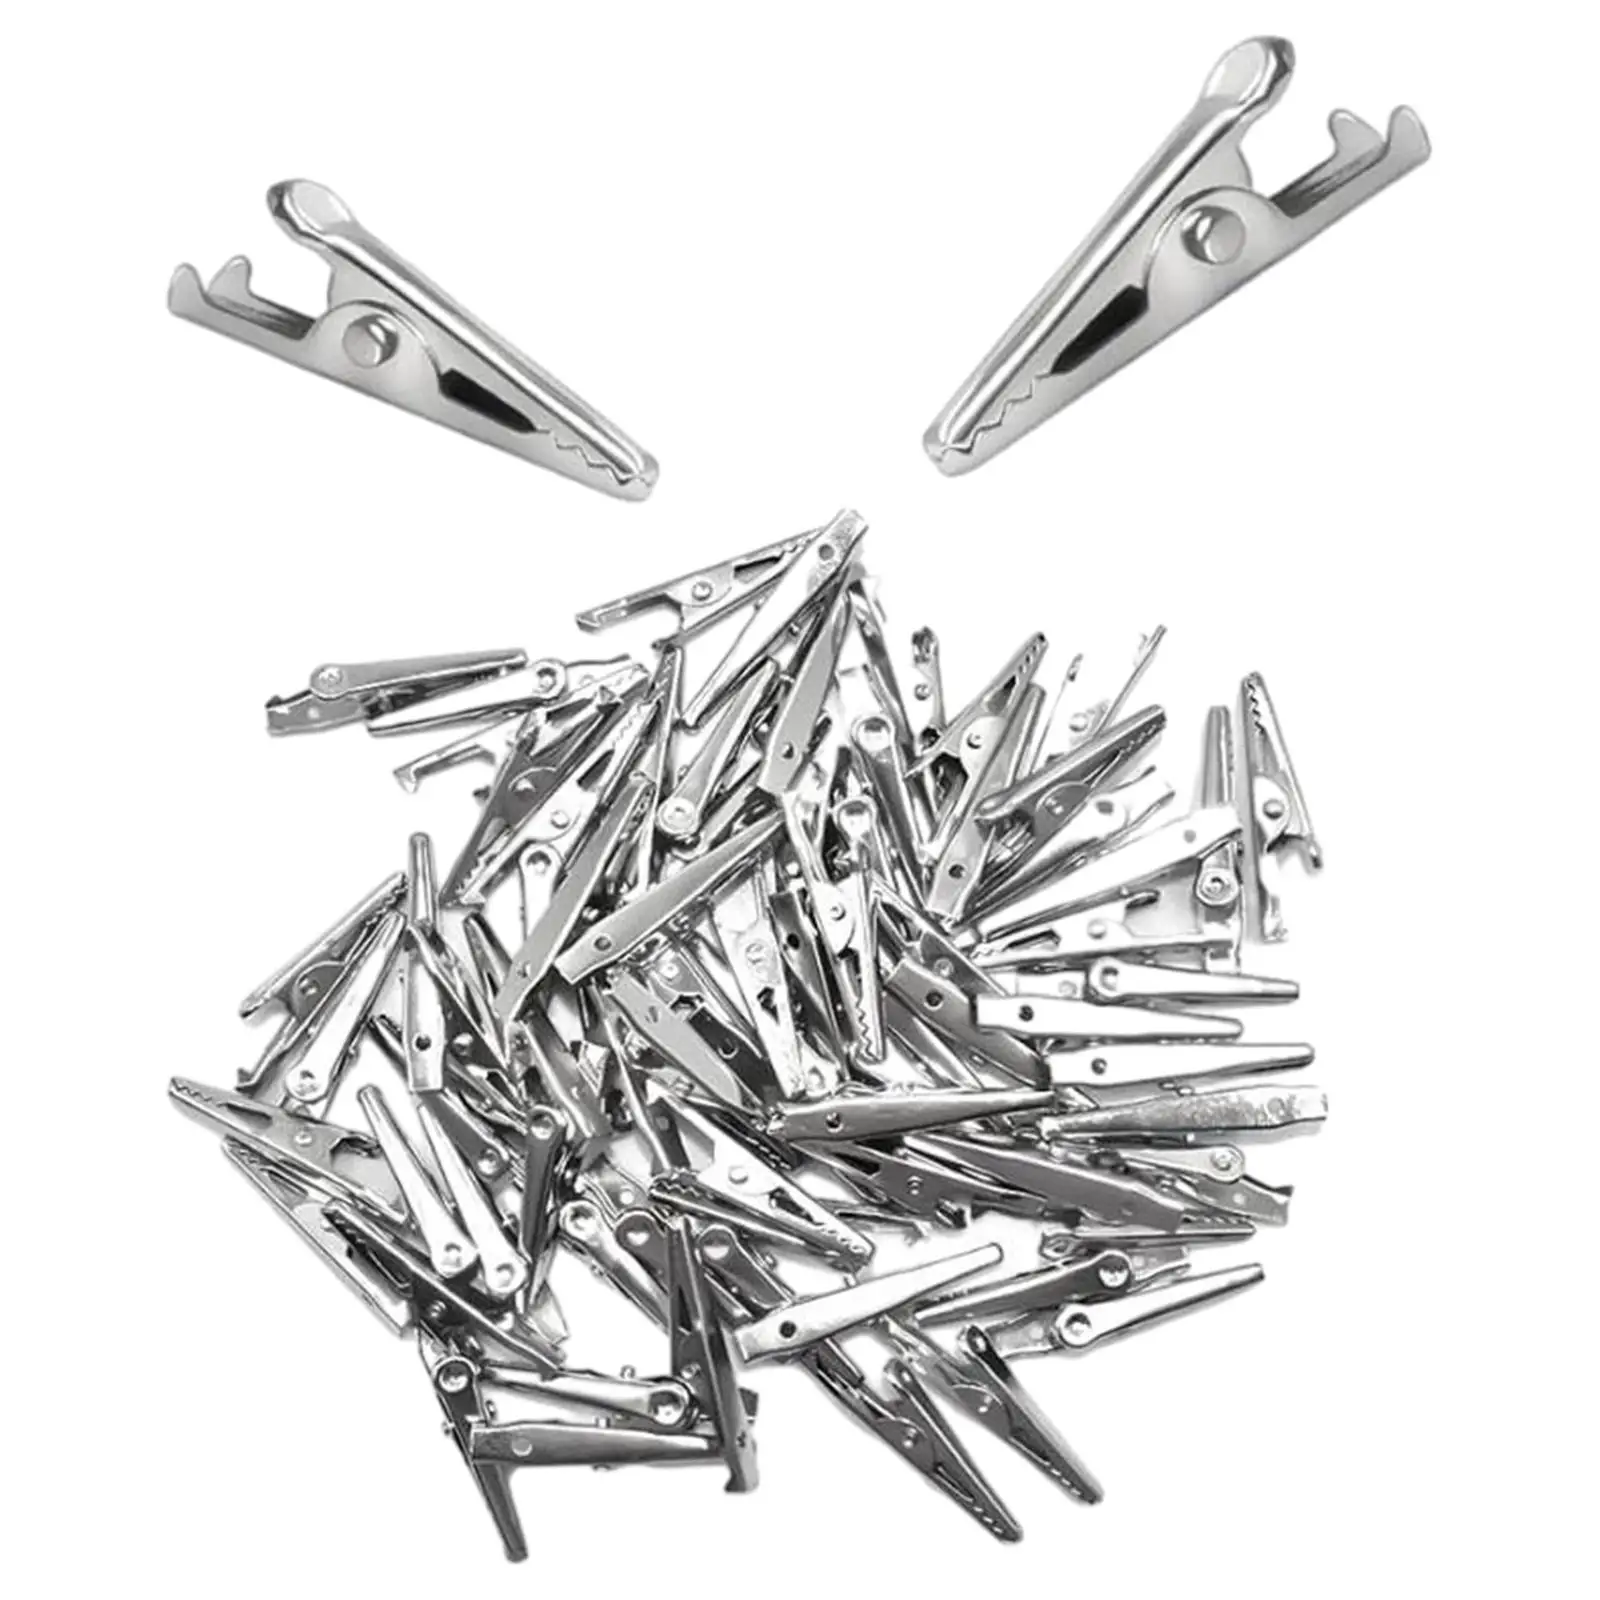 100 Pieces Metal Alligator Clips Cable Lead Clip Test Clip 35mm Crocodile Clamps Spring Clamps for Laboratory Testing Electrical